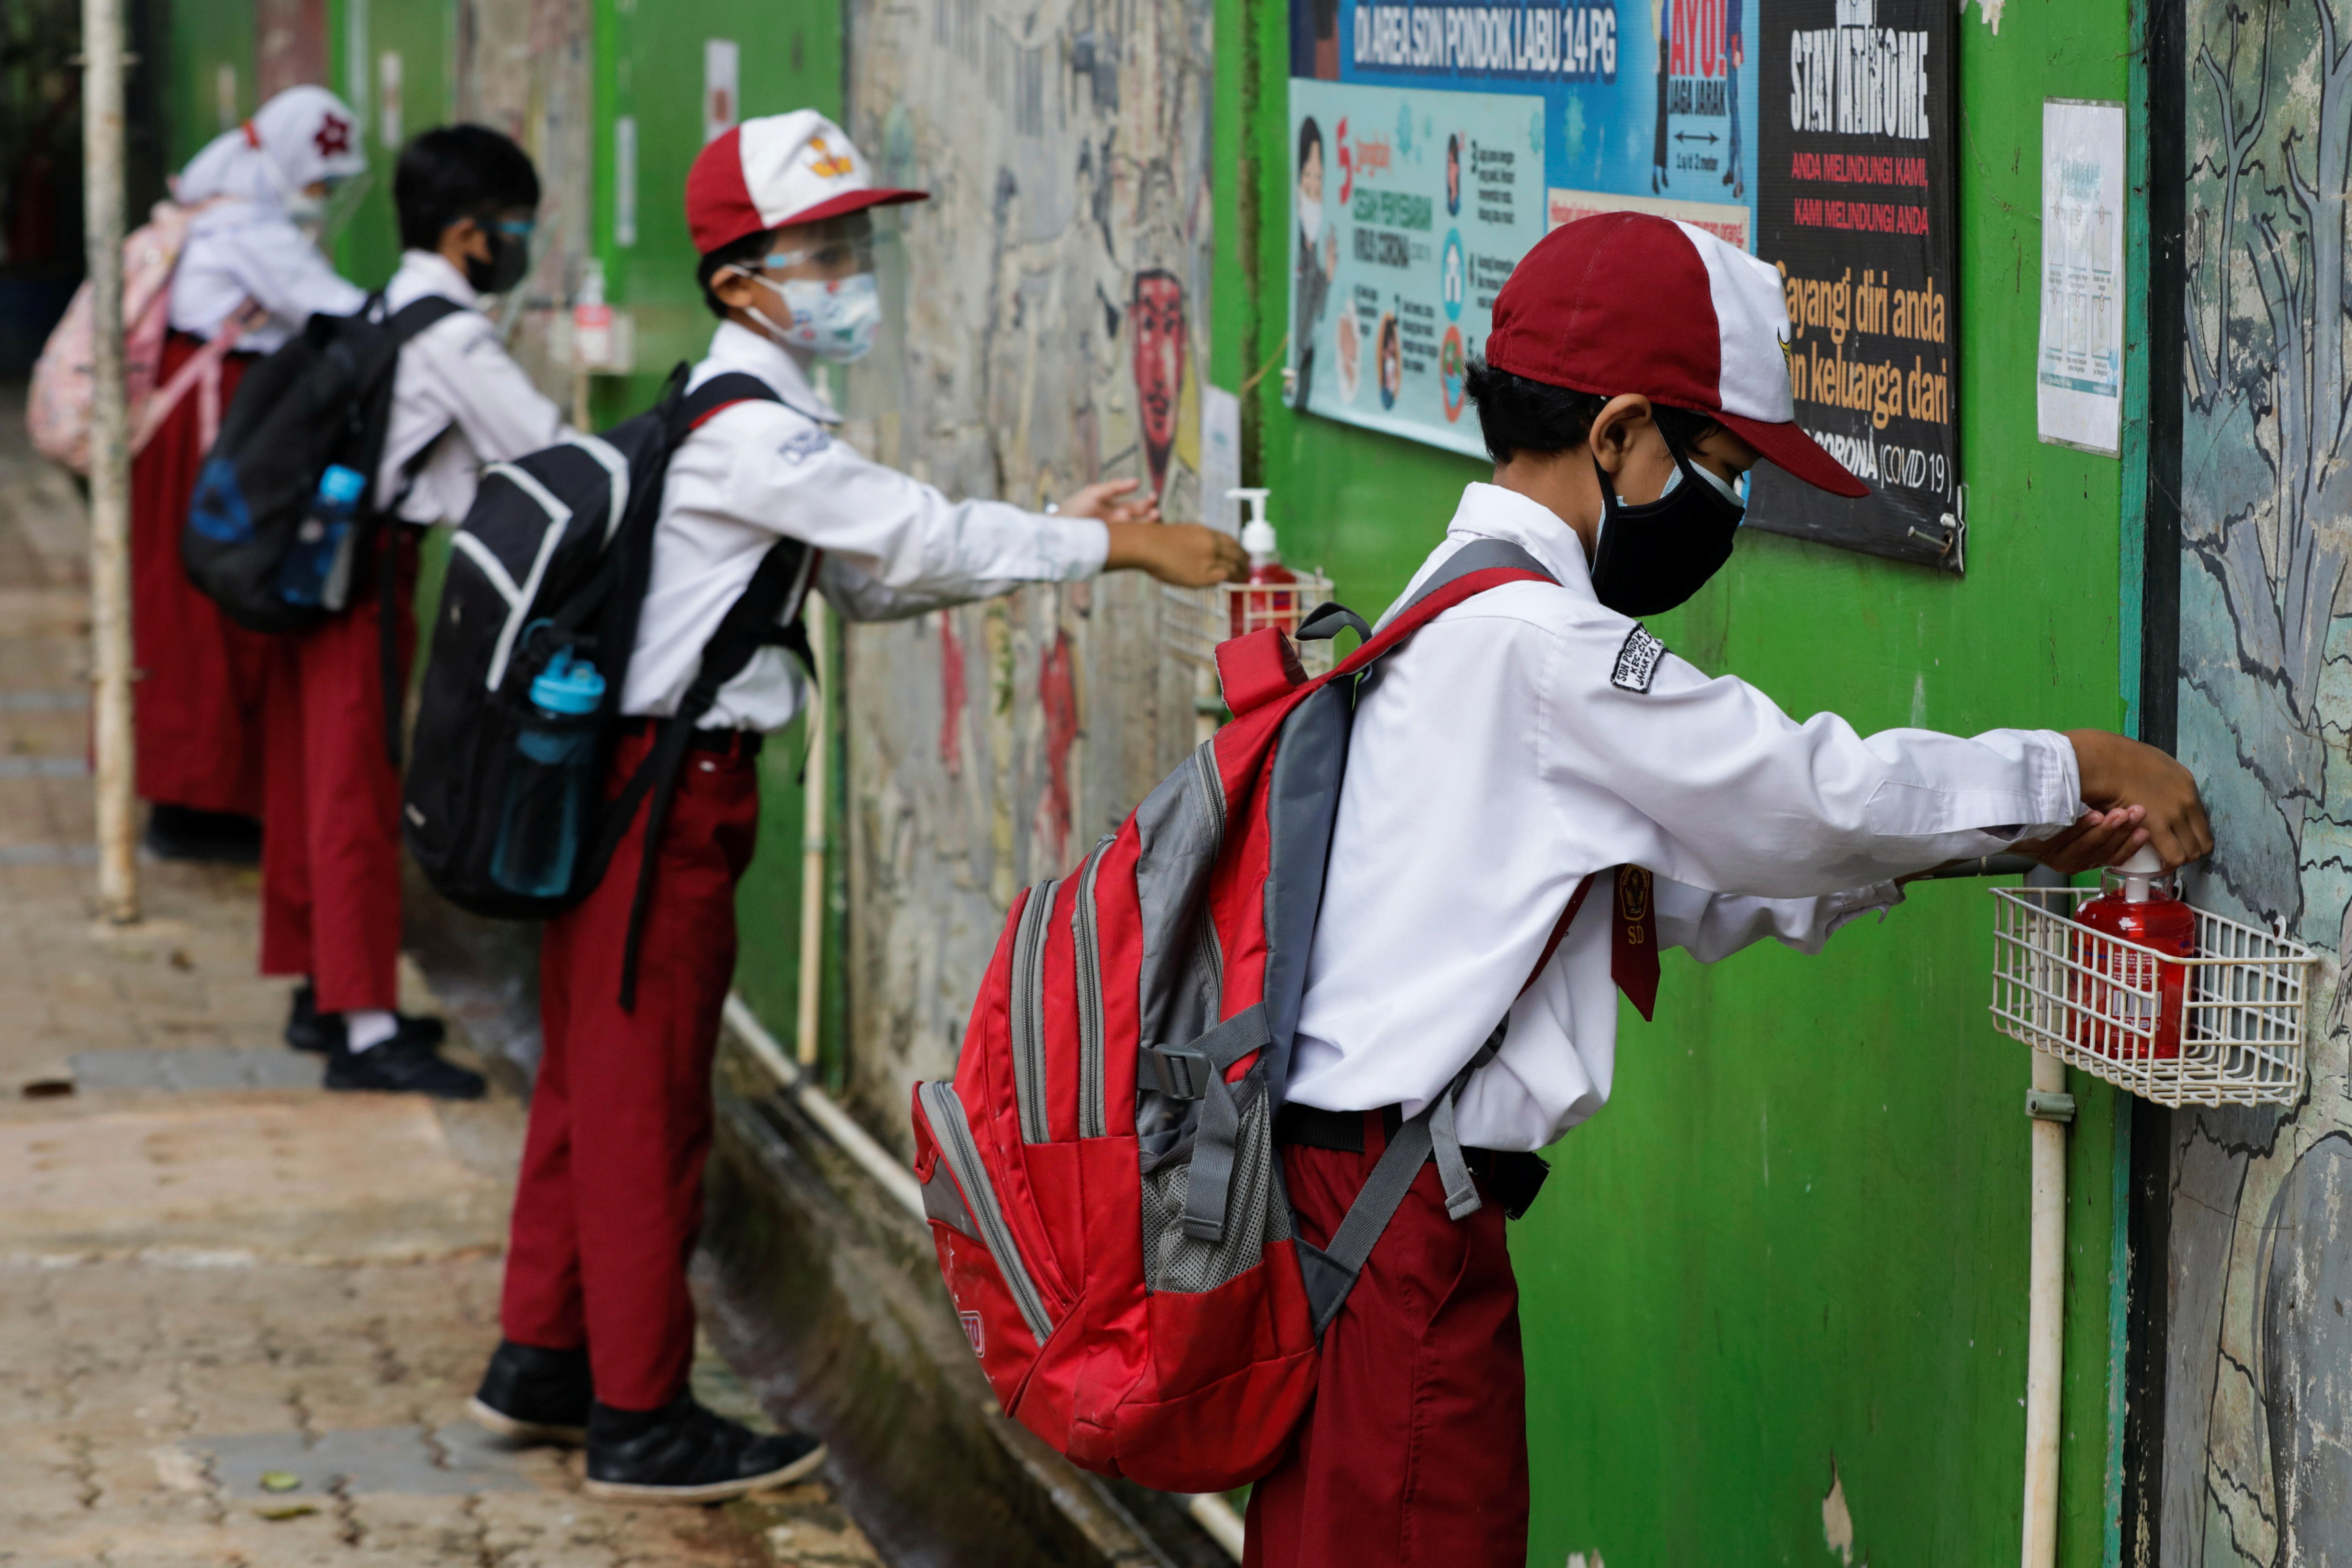 Schools reopen on trail basis as the government extends restrictions to curb the spread of coronavirus disease (COVID-19) in Jakarta